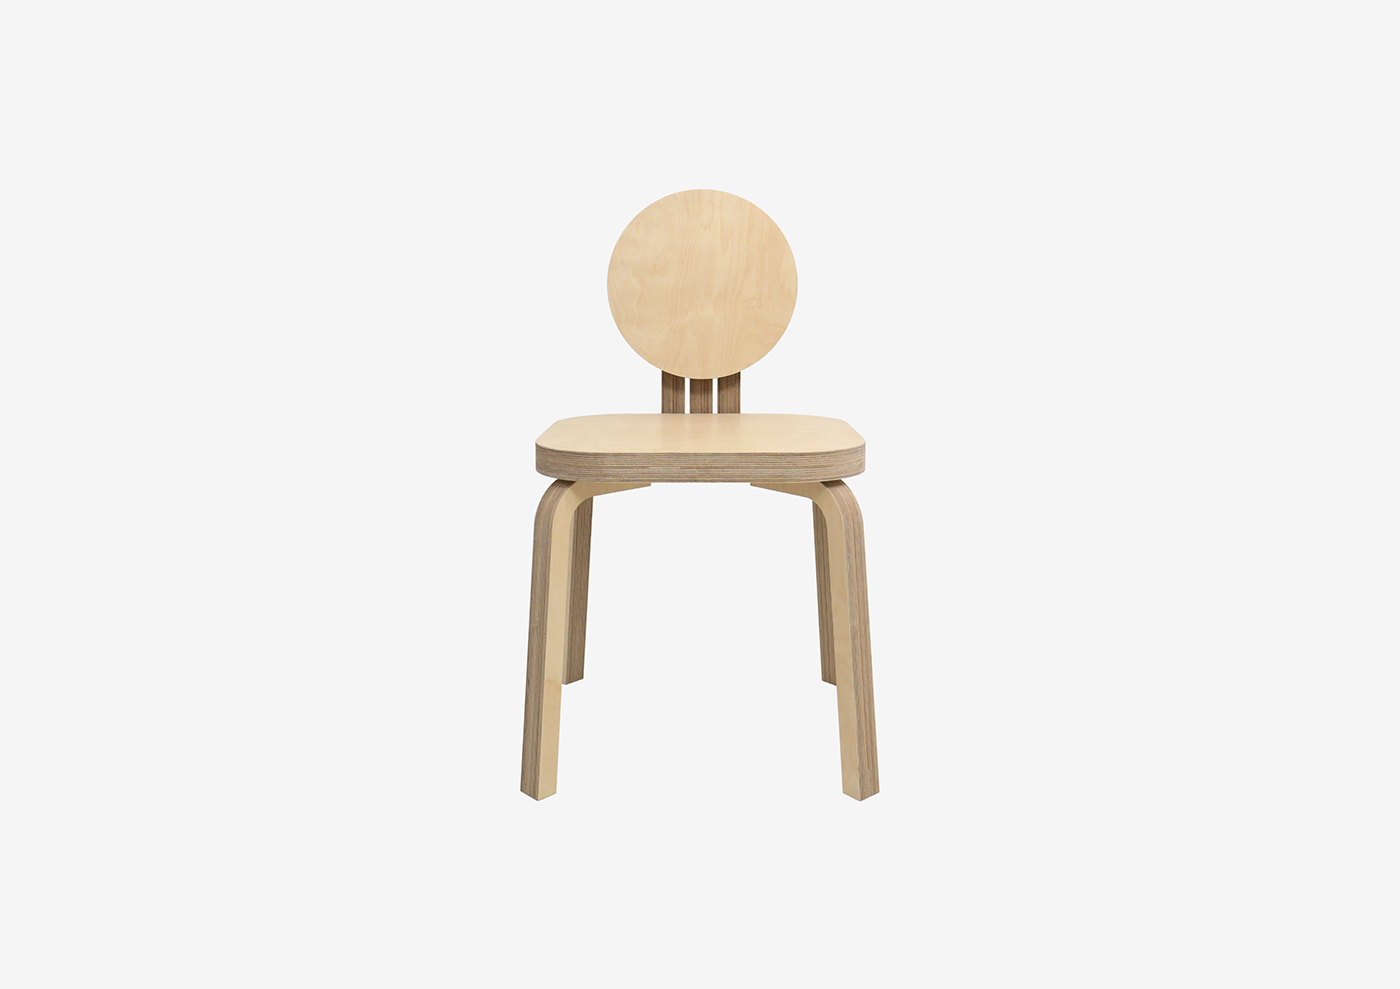 chair concept furniture product stool wood chair design